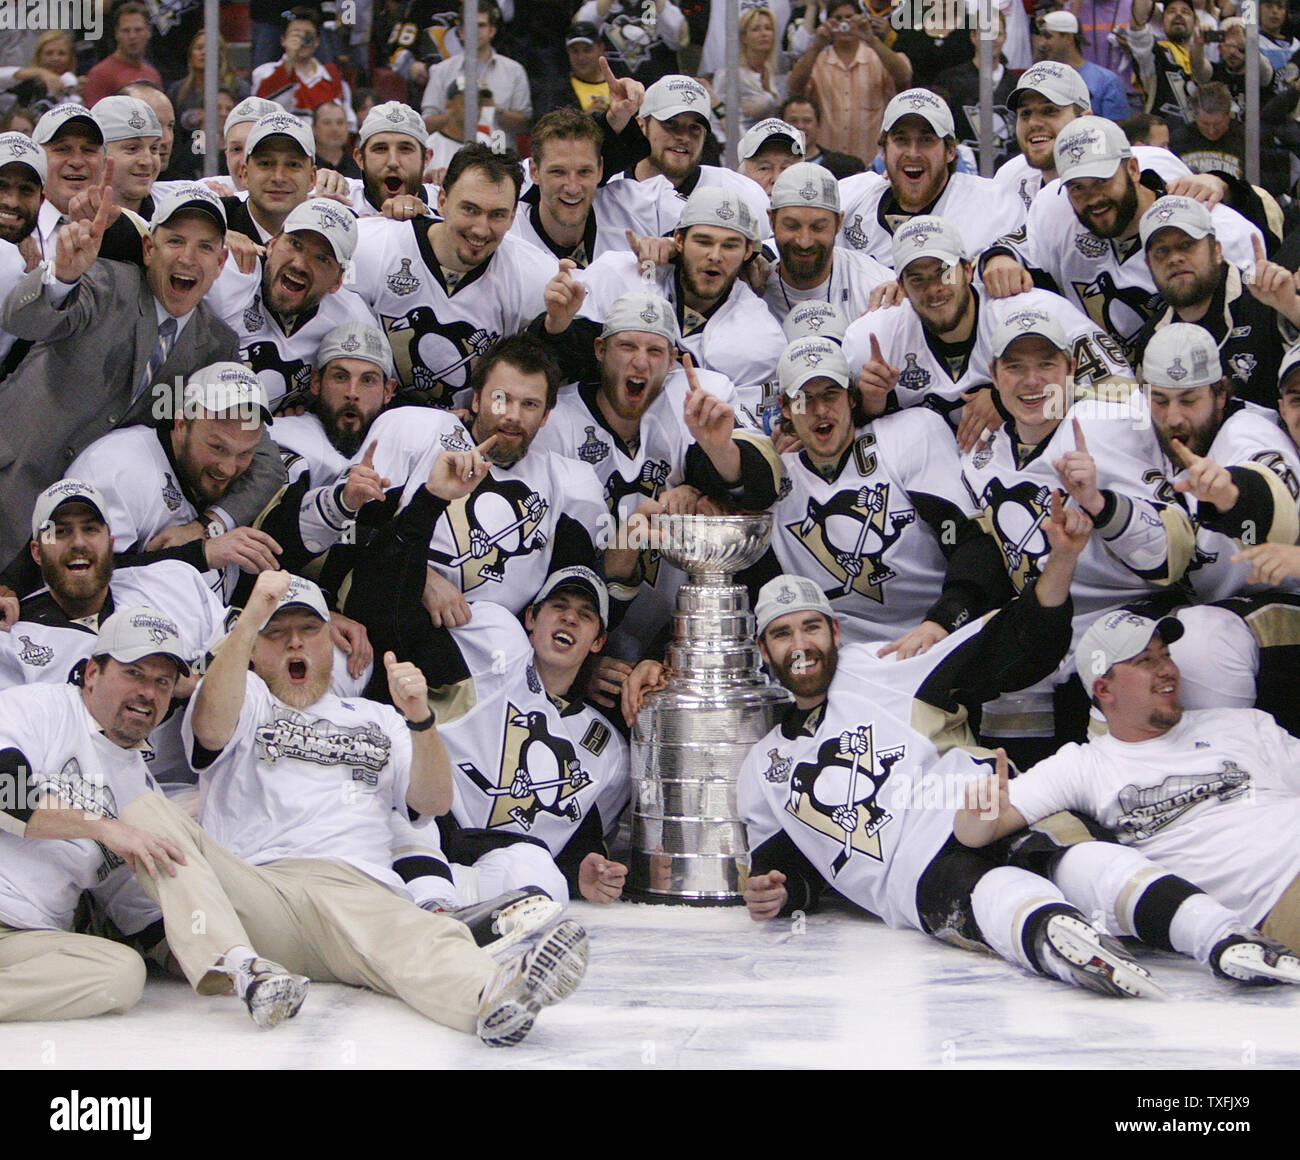 Penguins defeat Red Wings in Game 7 to take Stanley Cup